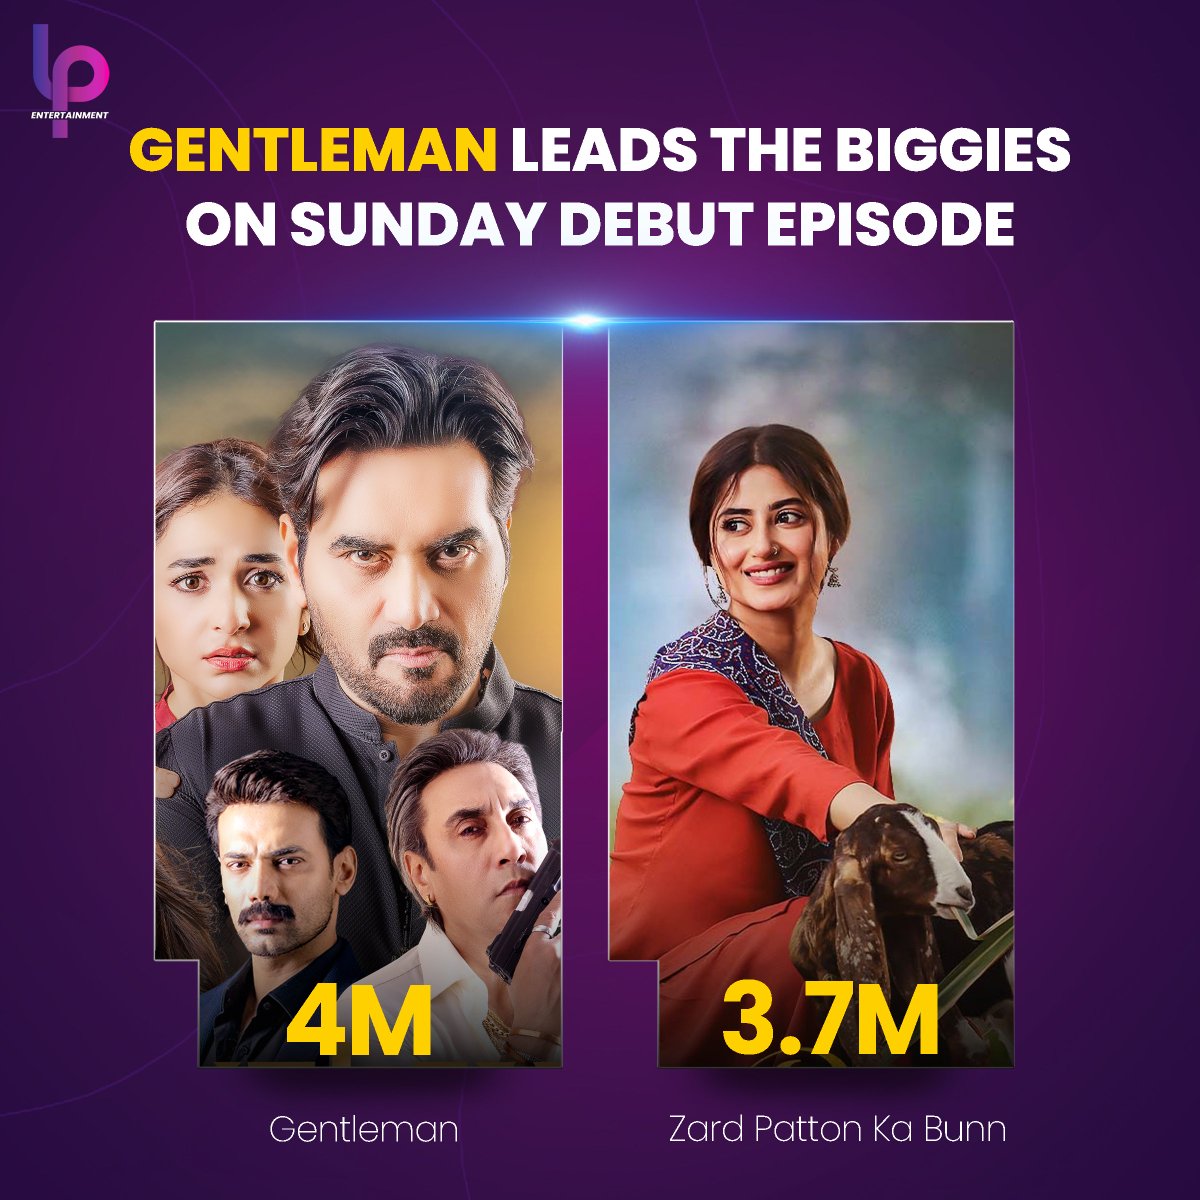 Gentleman has got a spectacular start. 🔥🤩 Gardnered impressive TRPs and now some decent viewership on YouTube by surpassing 4M views leading ahead Zard Patton Ka Bunn which is also going extremely well. #GentlemanDrama #HumayunSaeed #YumnaZaidi #LPEntertainment